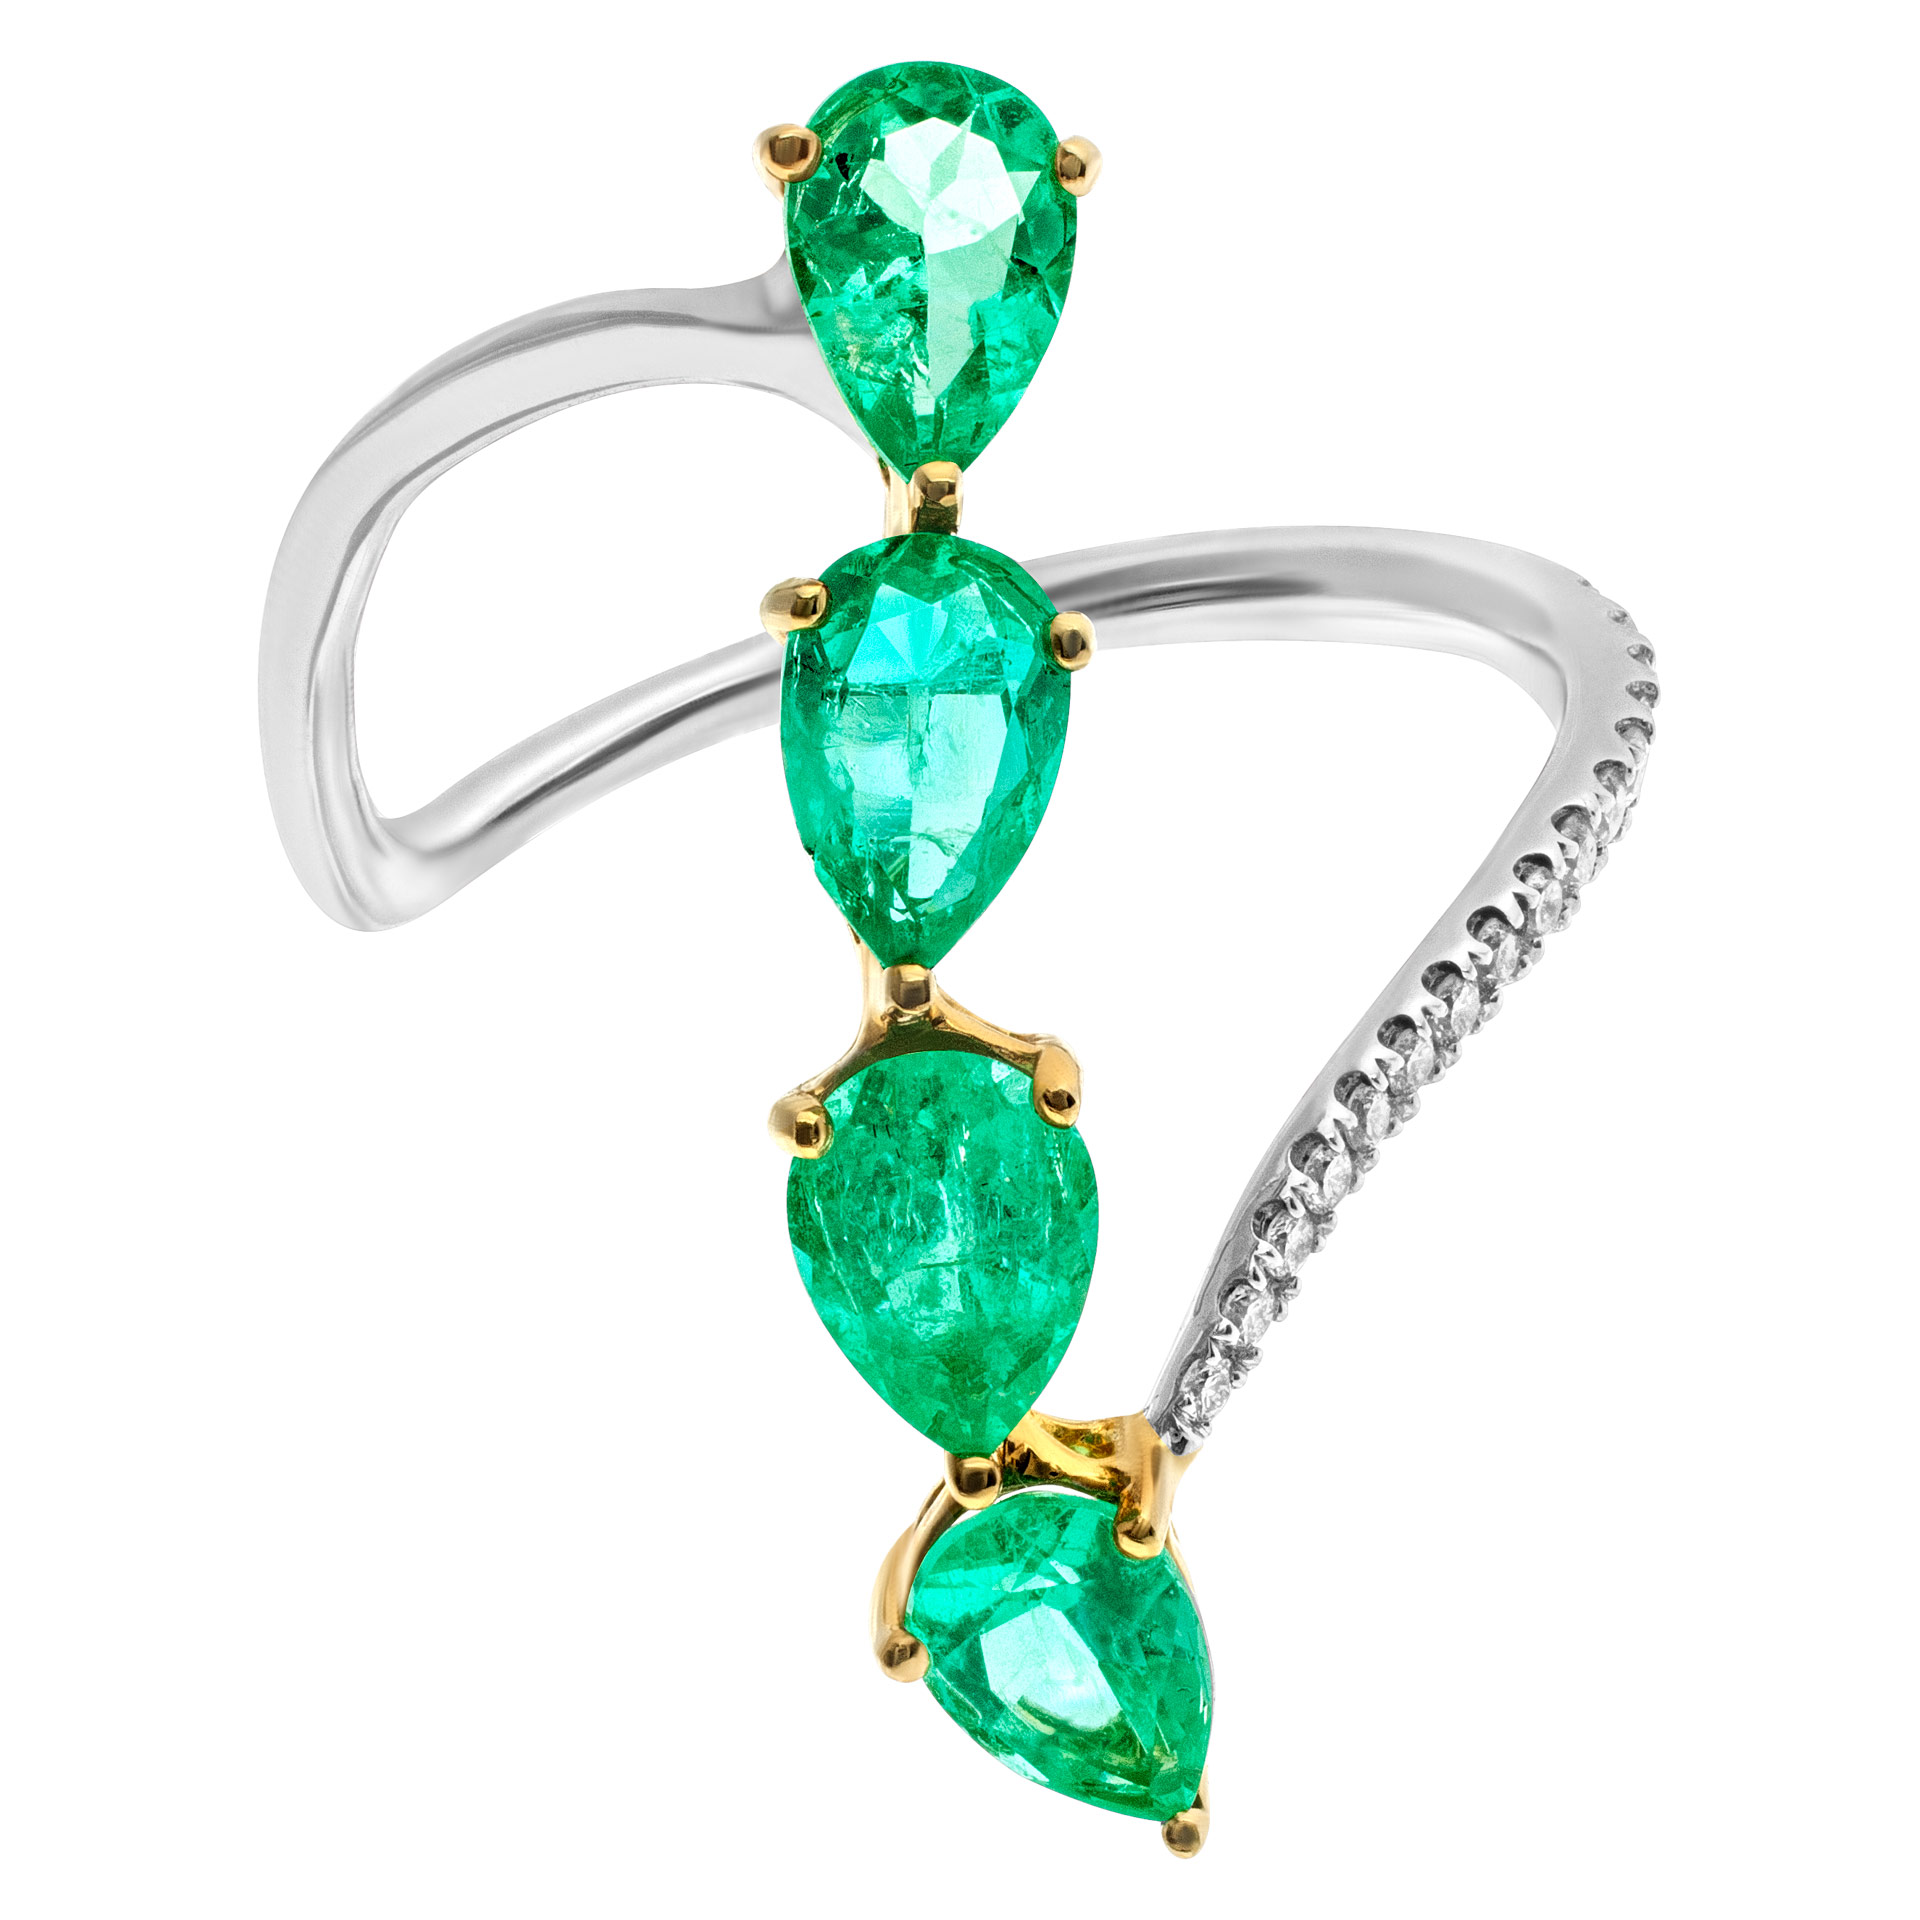 Emerald diamond drop ring in 18k white and yellow gold